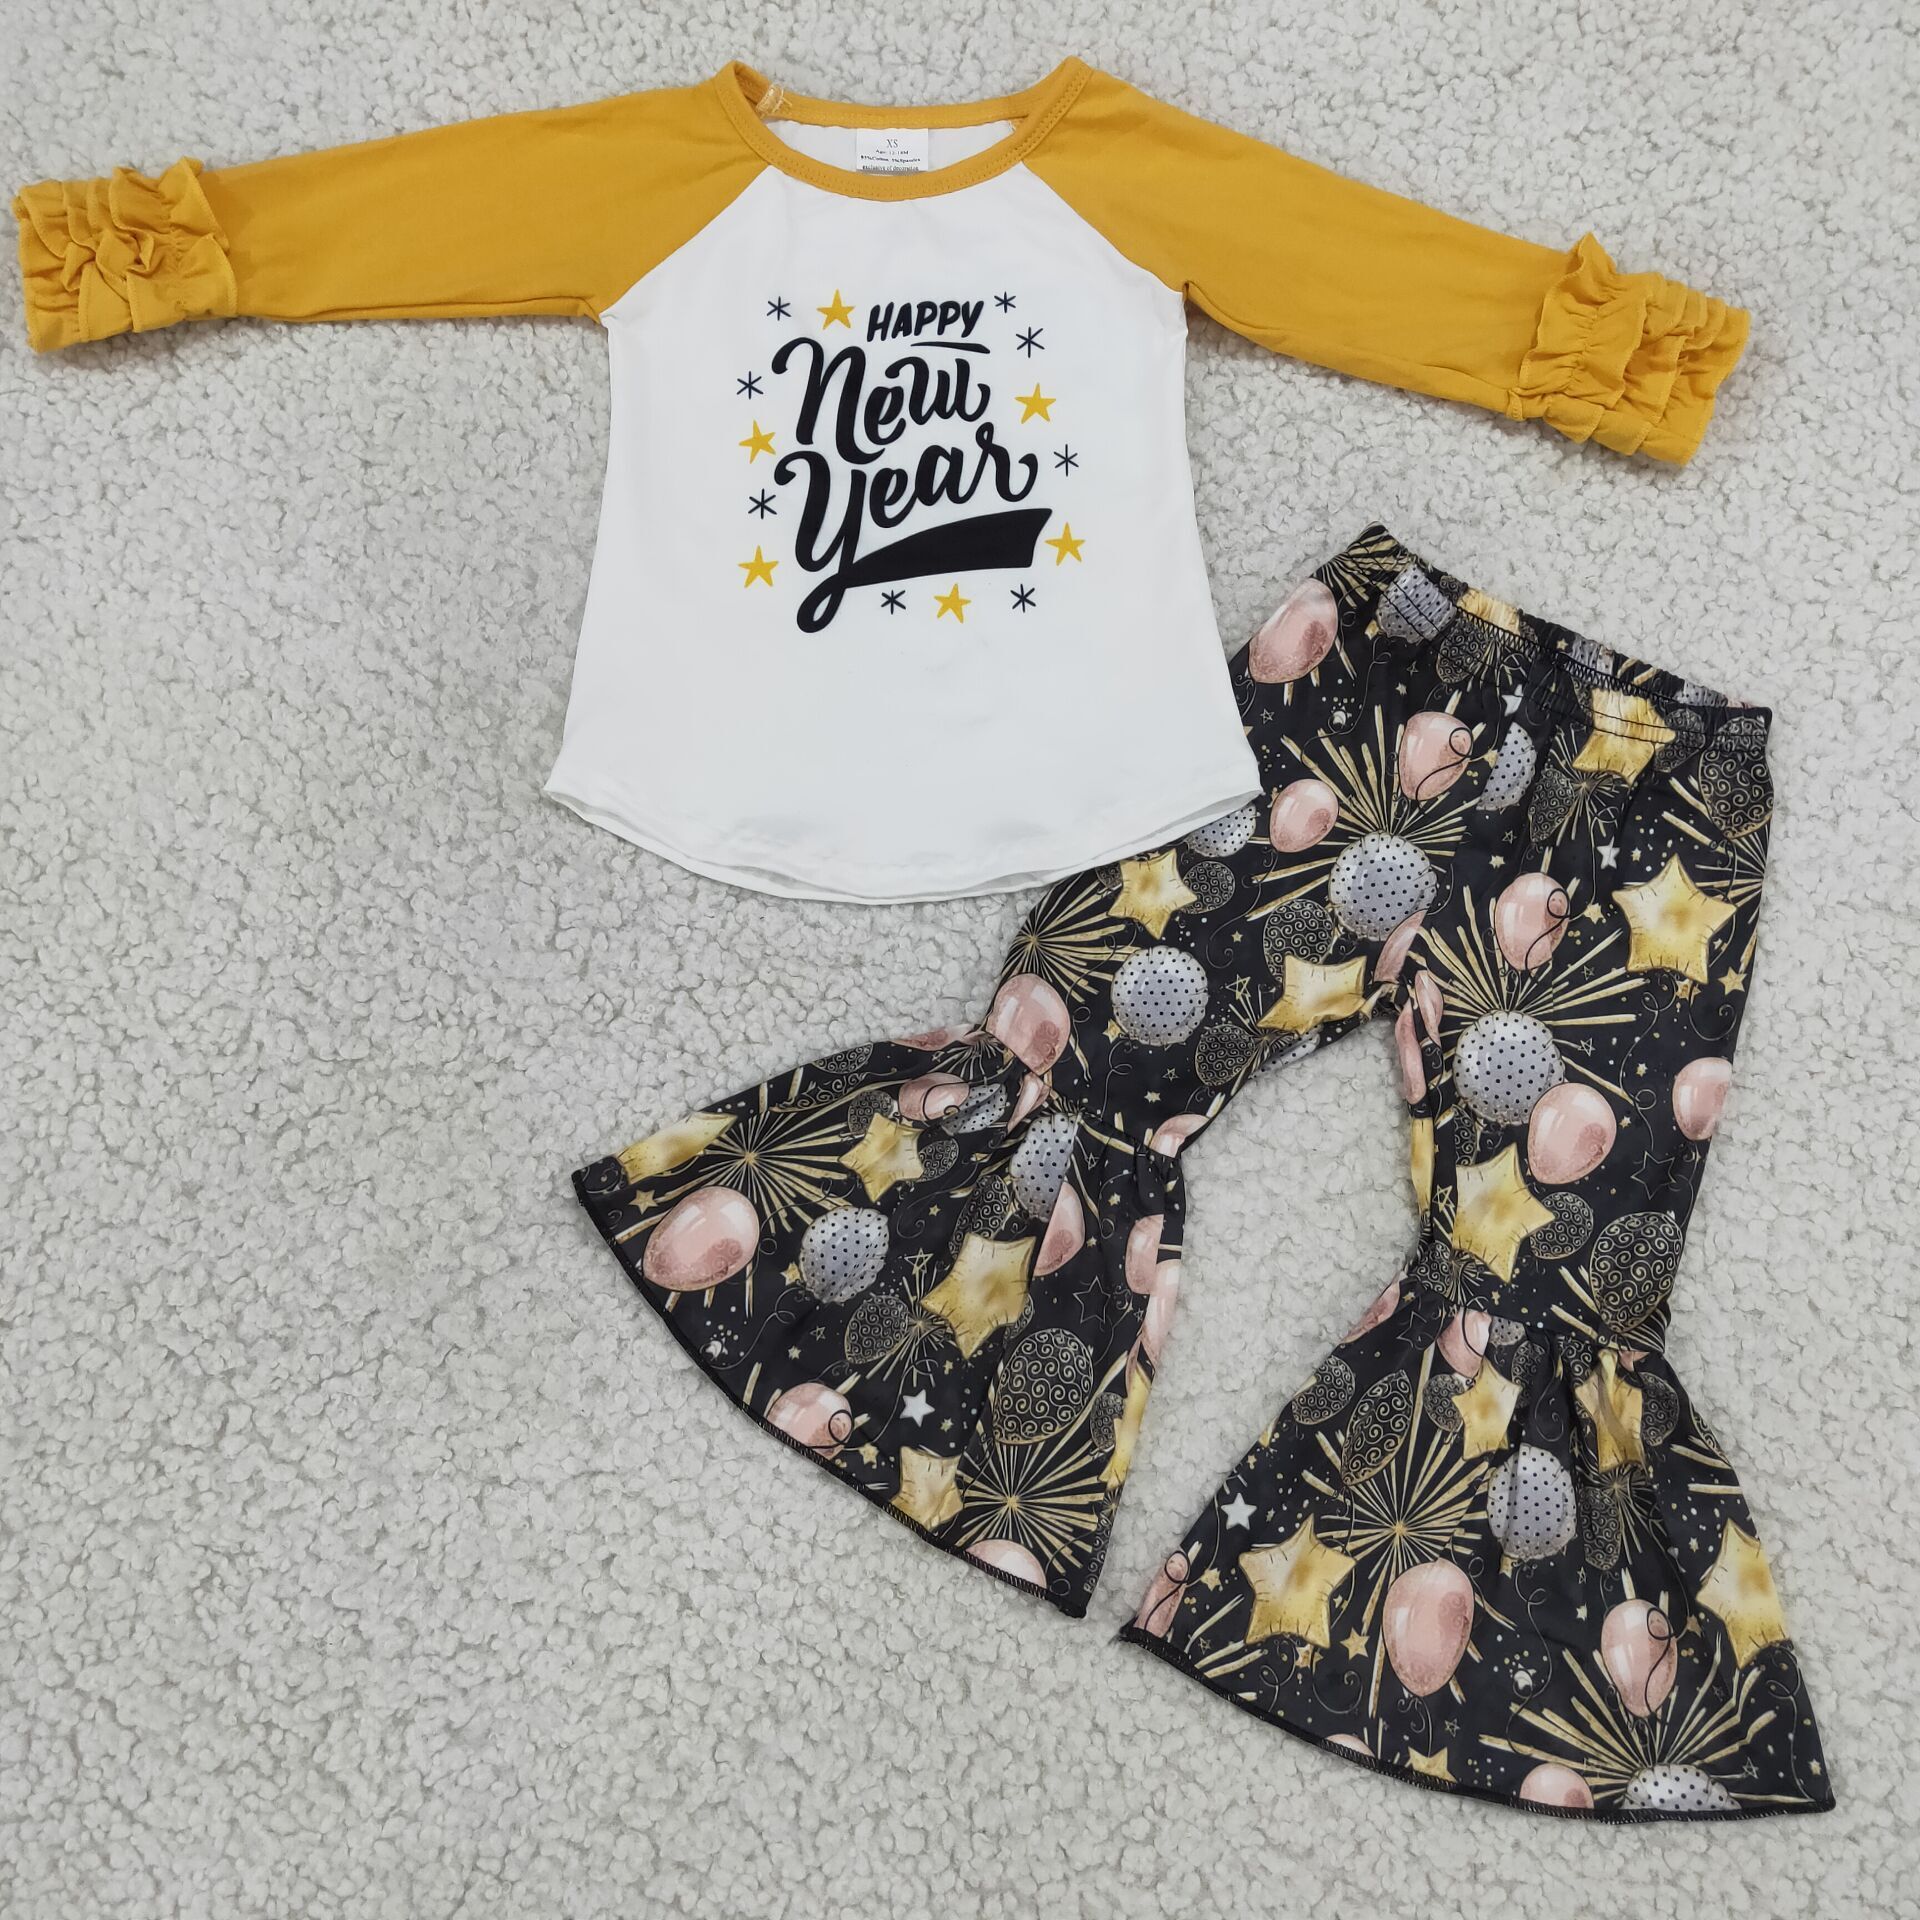 6 B11-2 kids clothes girls new year yellow winter outfits-promotion 2023.11.25